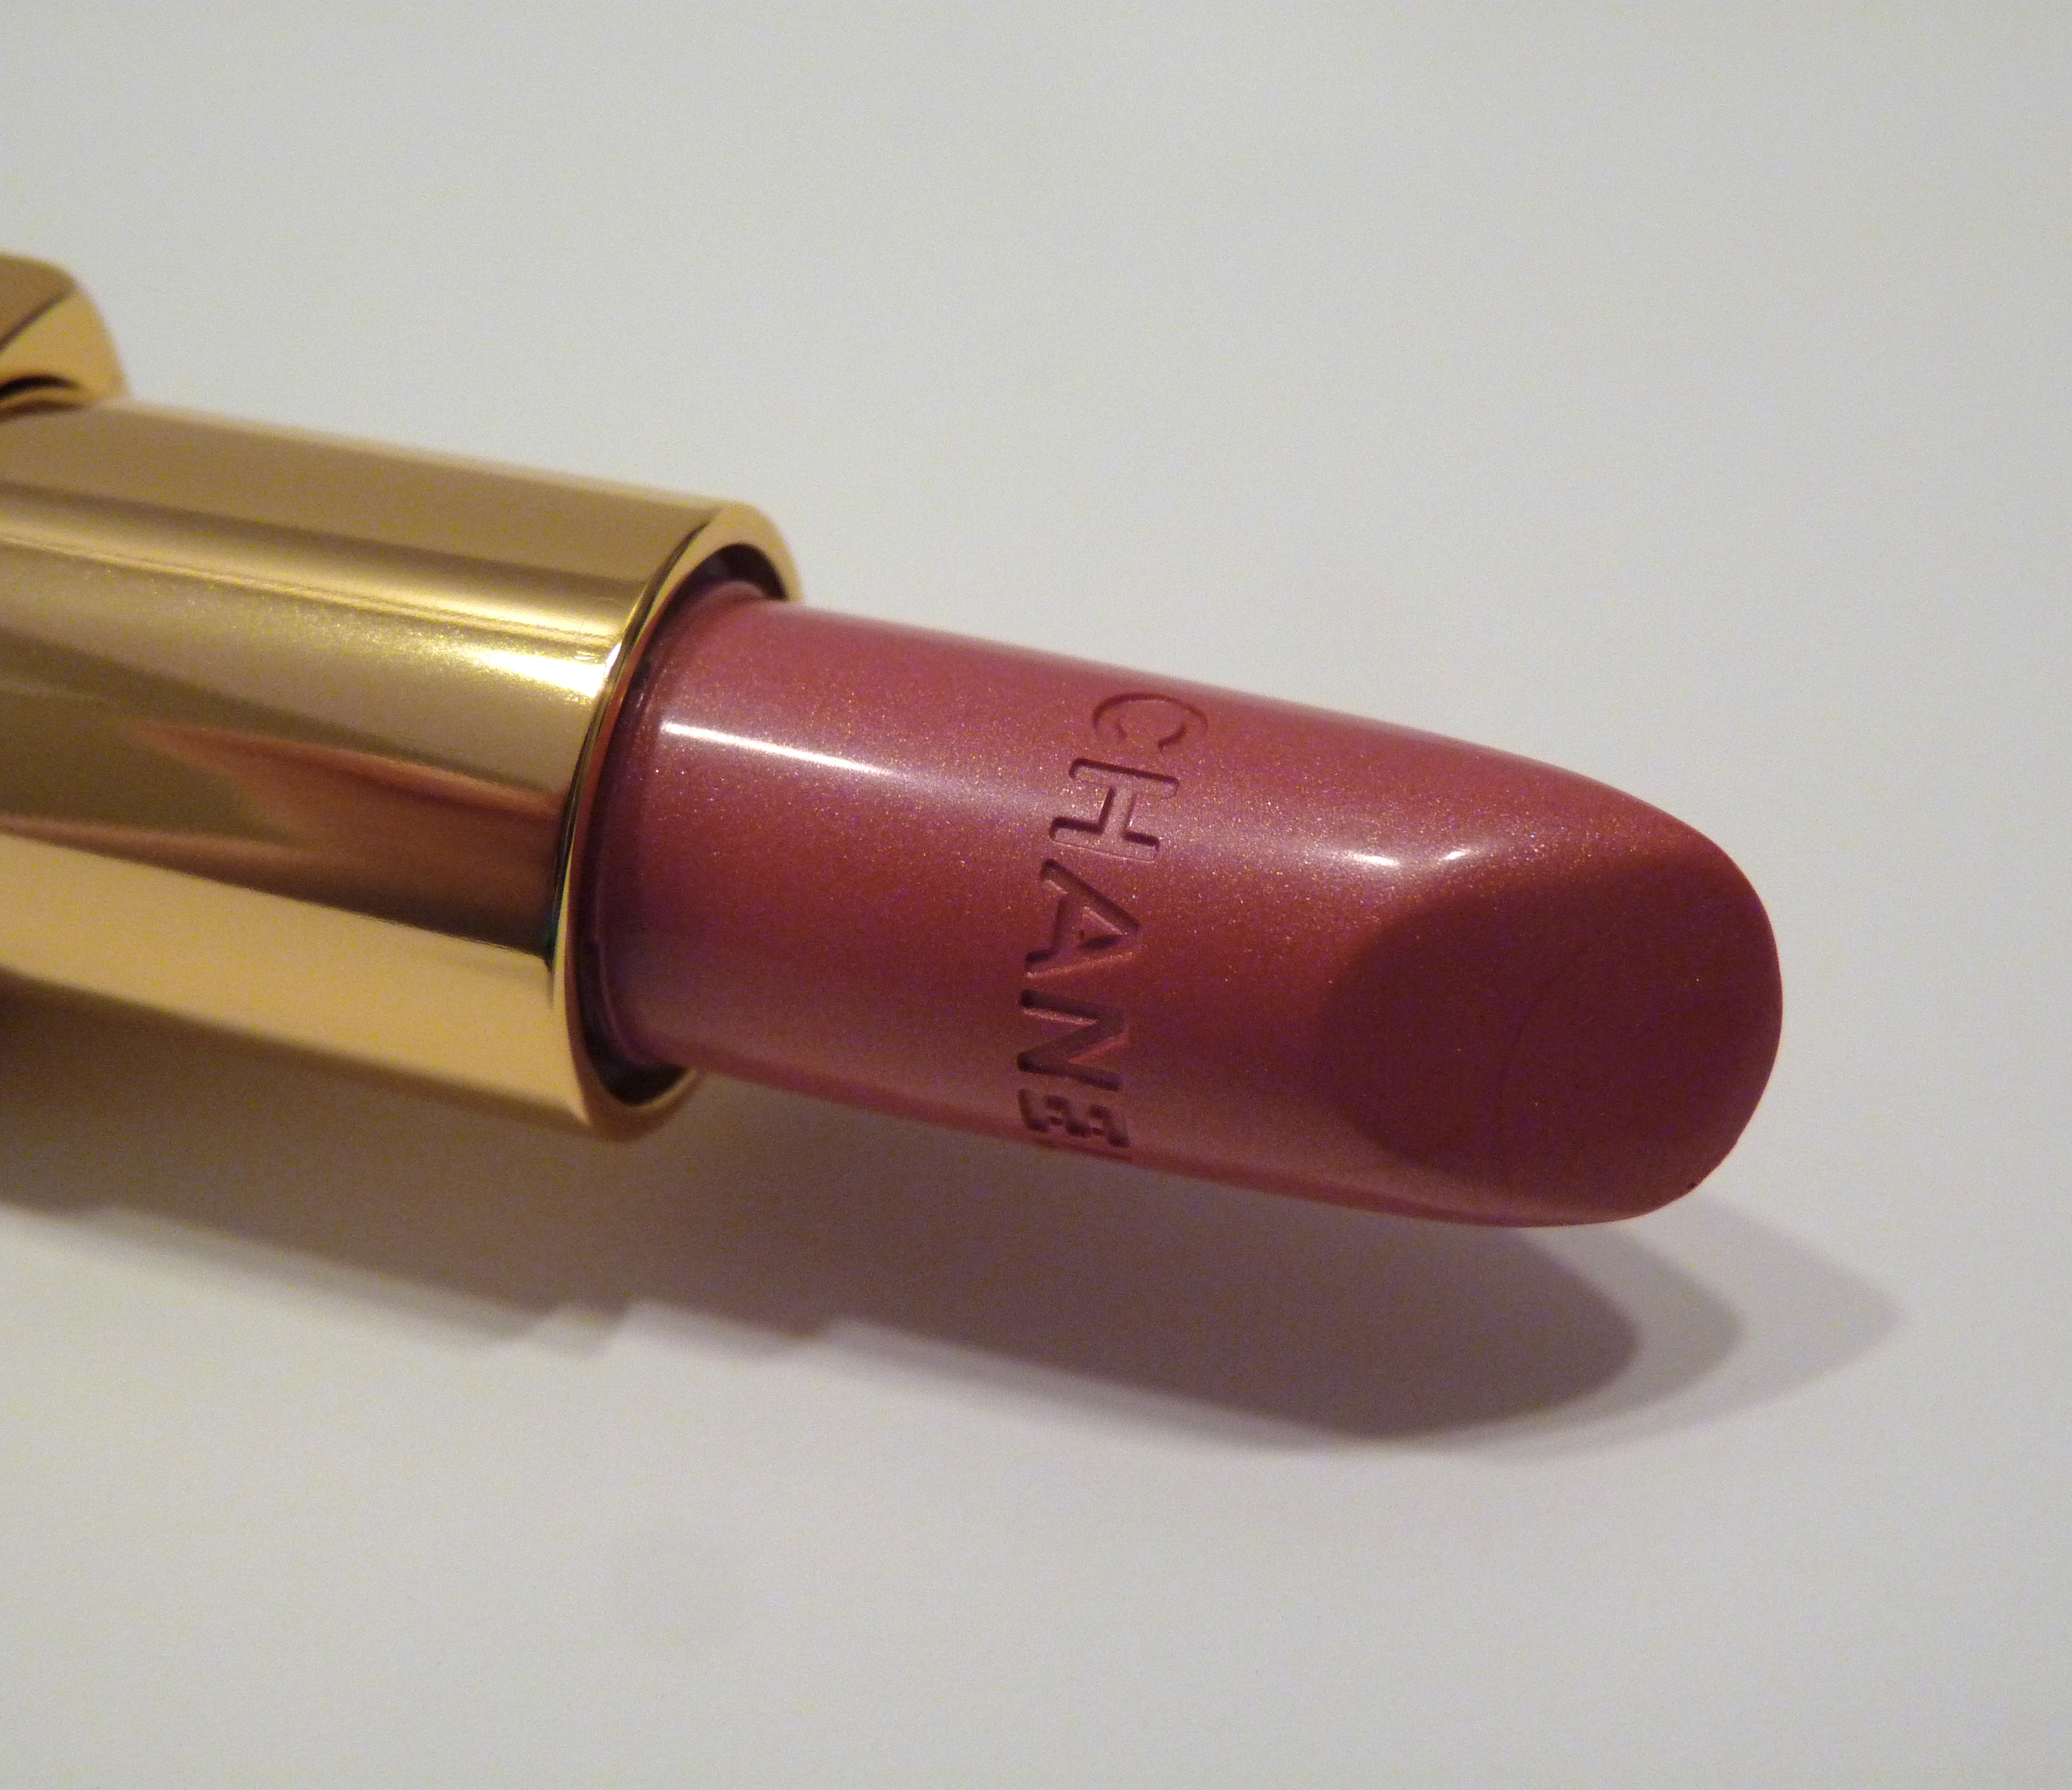 New Chanel Rouge Coco Lipstick Swatches & Review: Louise, Adrienne, Julia –  the beauty endeavor